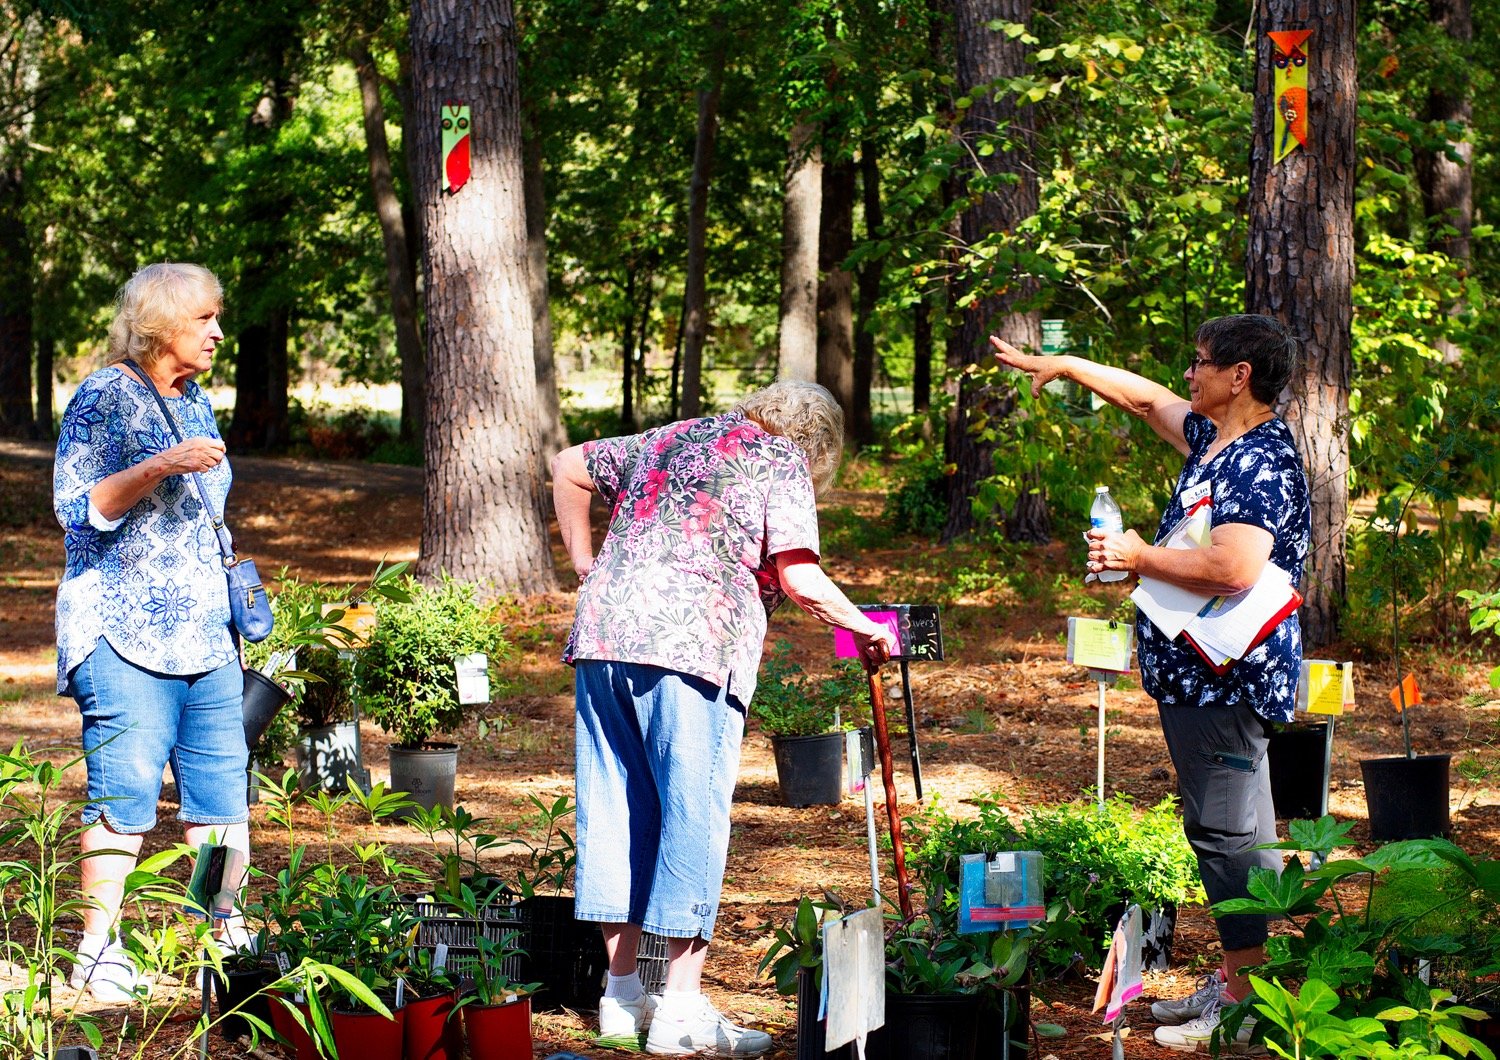 Lin Grado doled out advice during the autumn plant sale at the Wood County Arboretum and Botanical Gardens.